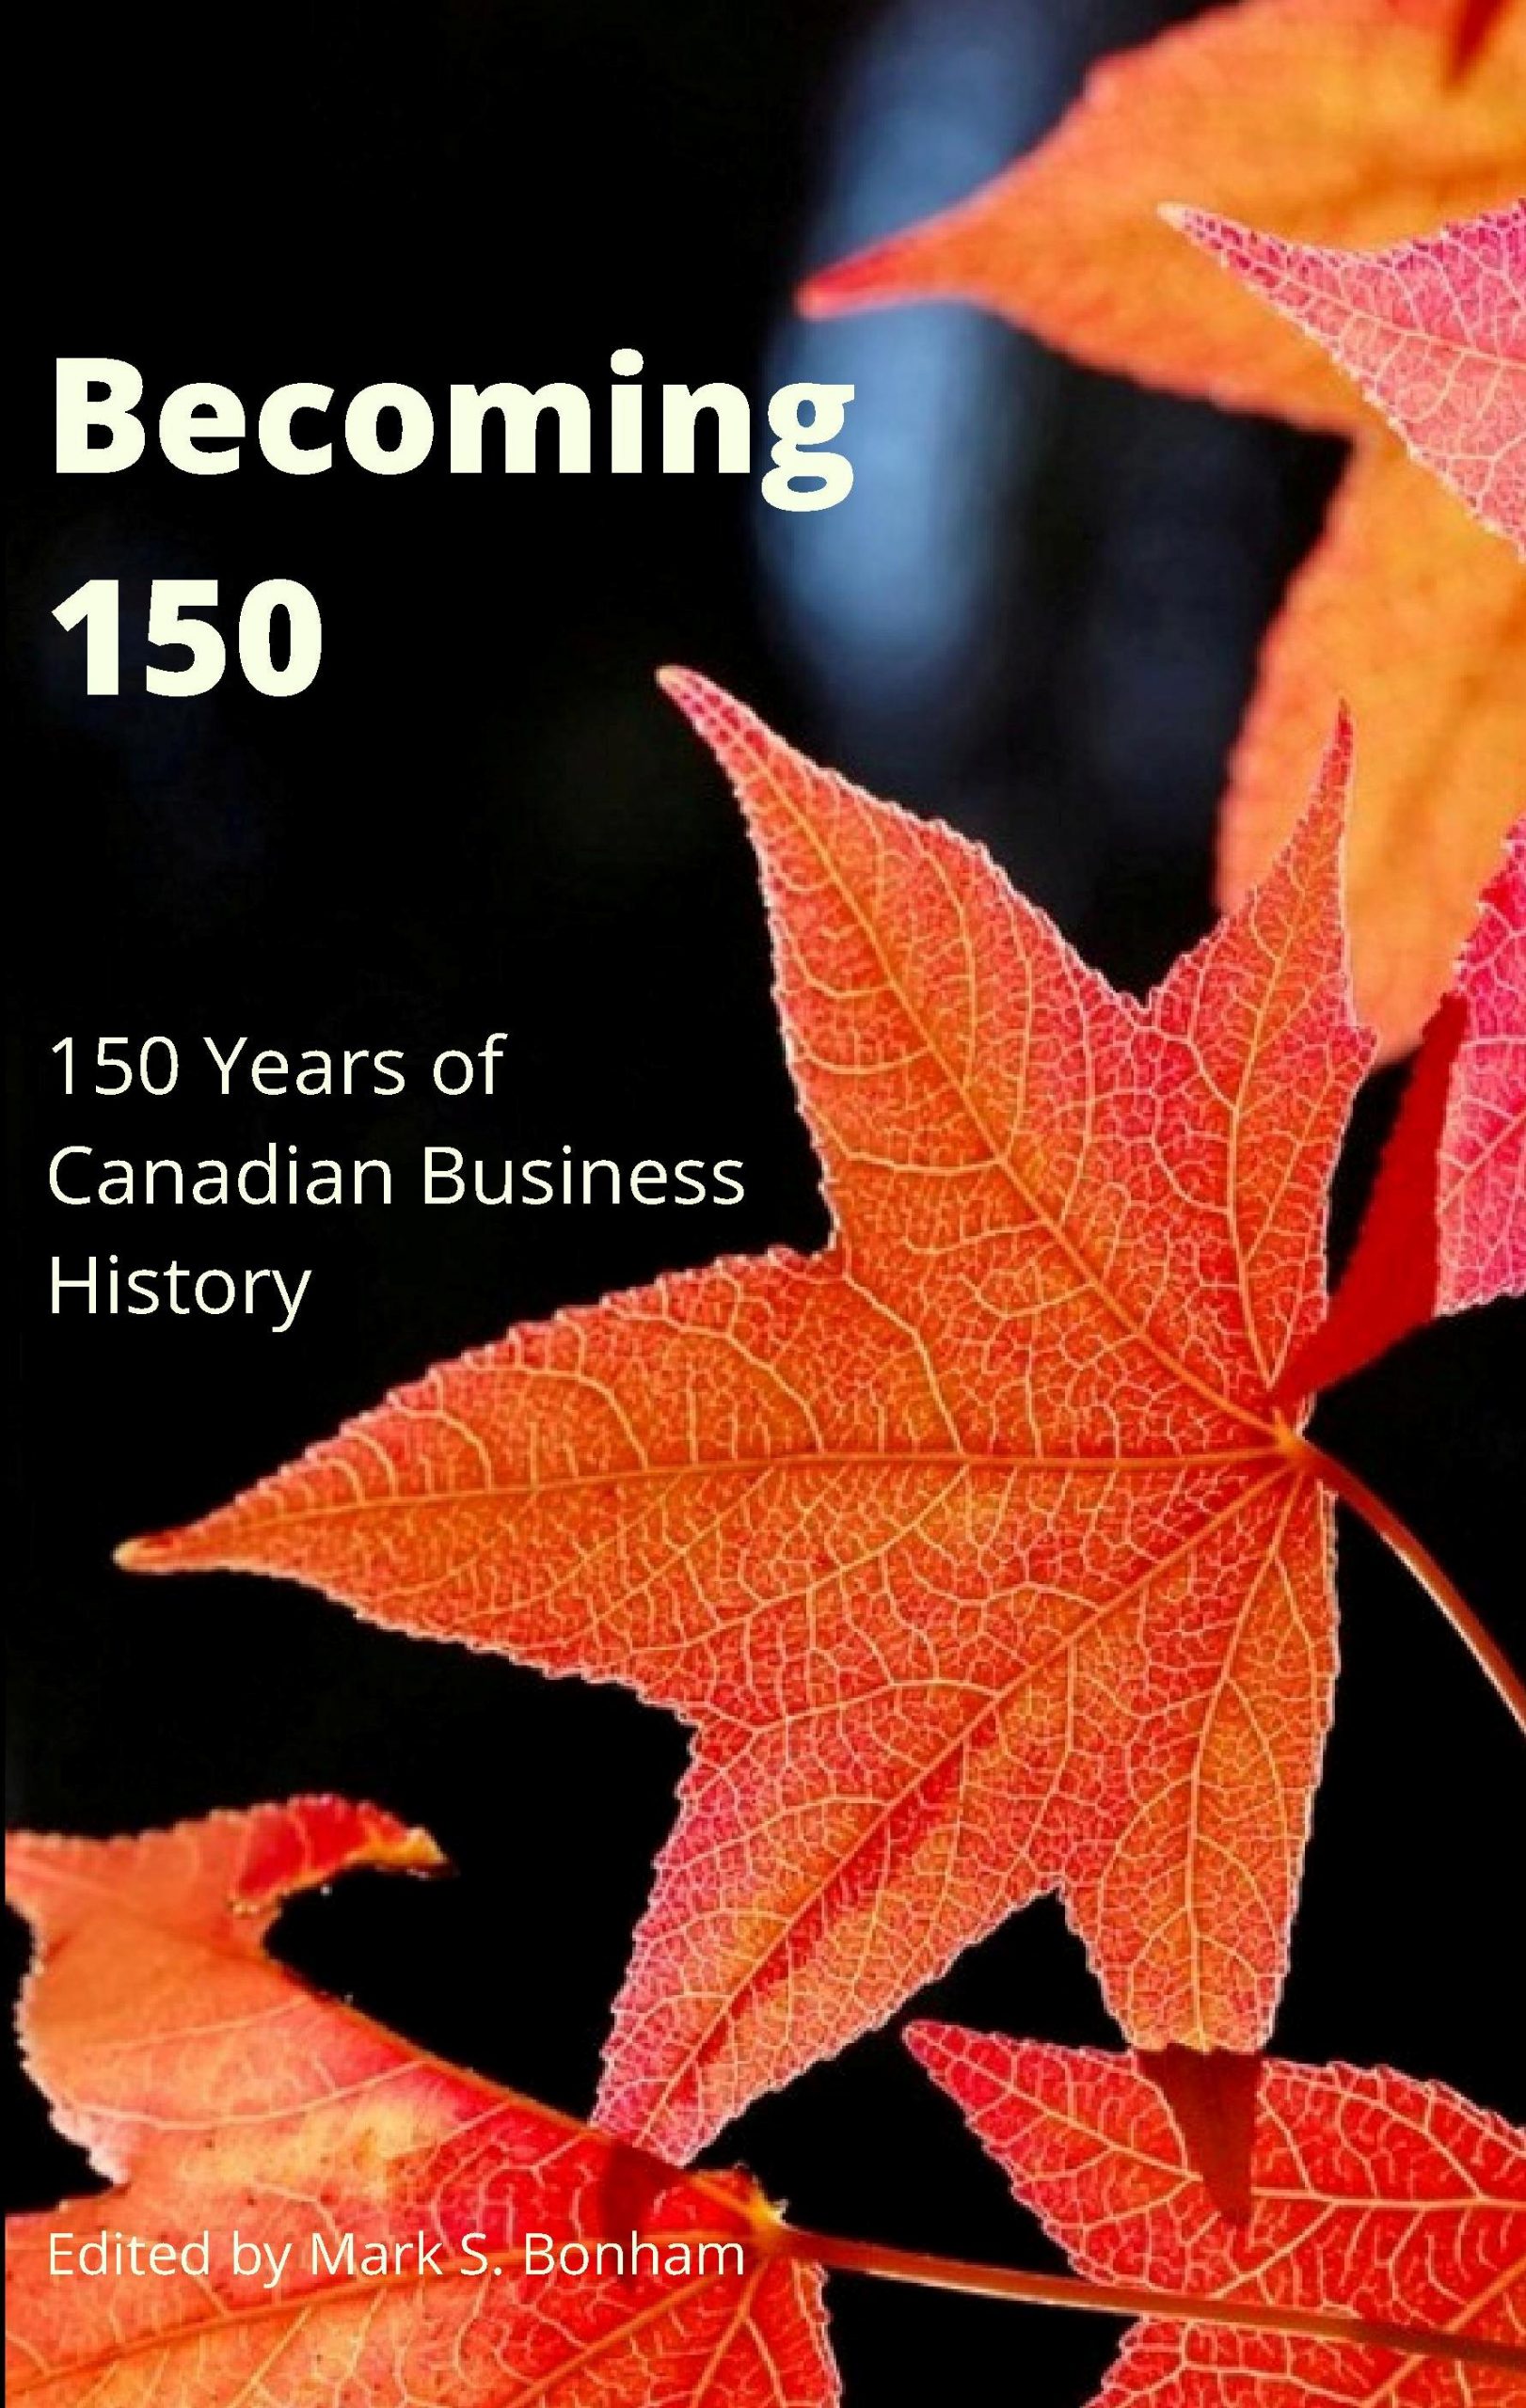 Book Launch Video for ‘Becoming 150’ Now on CBHA/ACHA YouTube Channel